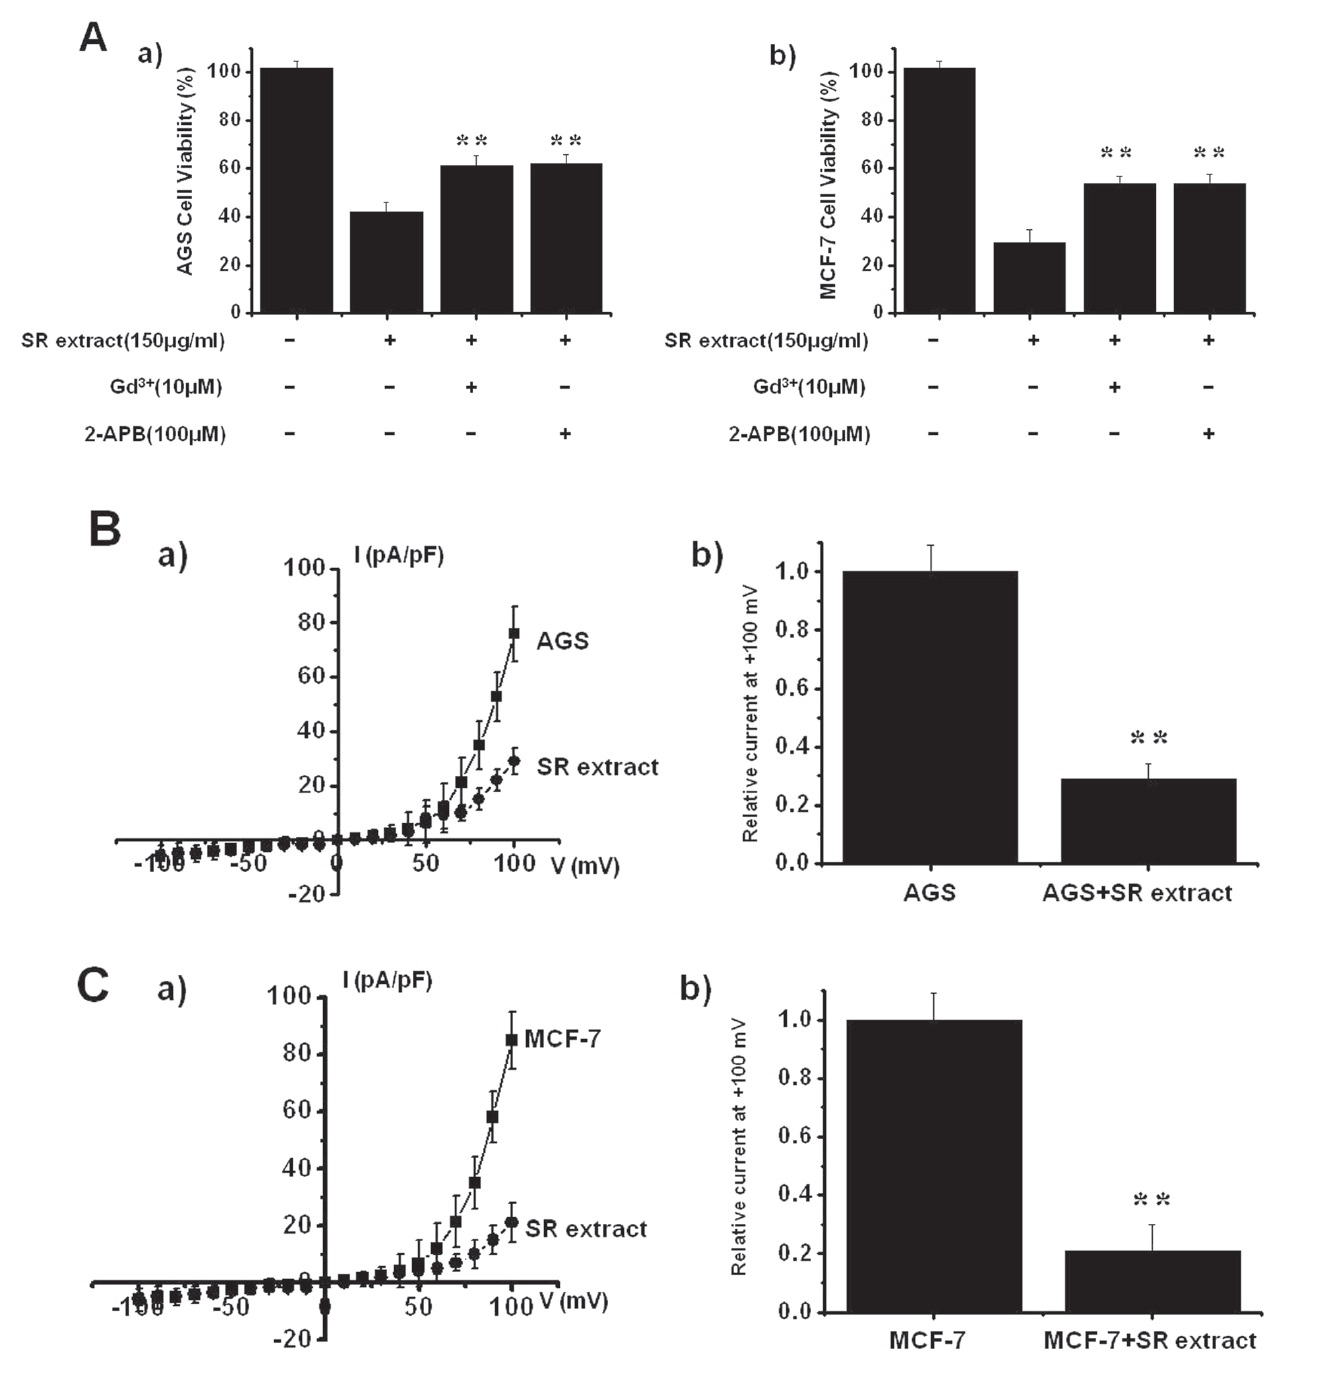 Inhibition of cell death by transient receptor potential melastatin (TRPM7) blockade. (A) MTT assay induced by different treatment as indicated in AGS (a) and MCF-7 (b) cells. Inhibition of TRPM7 channels by Gd3  or 2-APB reduced SR induced apoptosis. (B) Effect of SR on TRPM7-like current in AGS cells. I-V curves (a) and summary bar graph (b) in the absence (■) or presence (●) of SR. (C) Effect of SR on the TRPM7-like current in MCF-7 cells. I-V curves (a) and summary bar graph (b) in the absence (■) or presence (●) of SR. **P ？ 0.01.